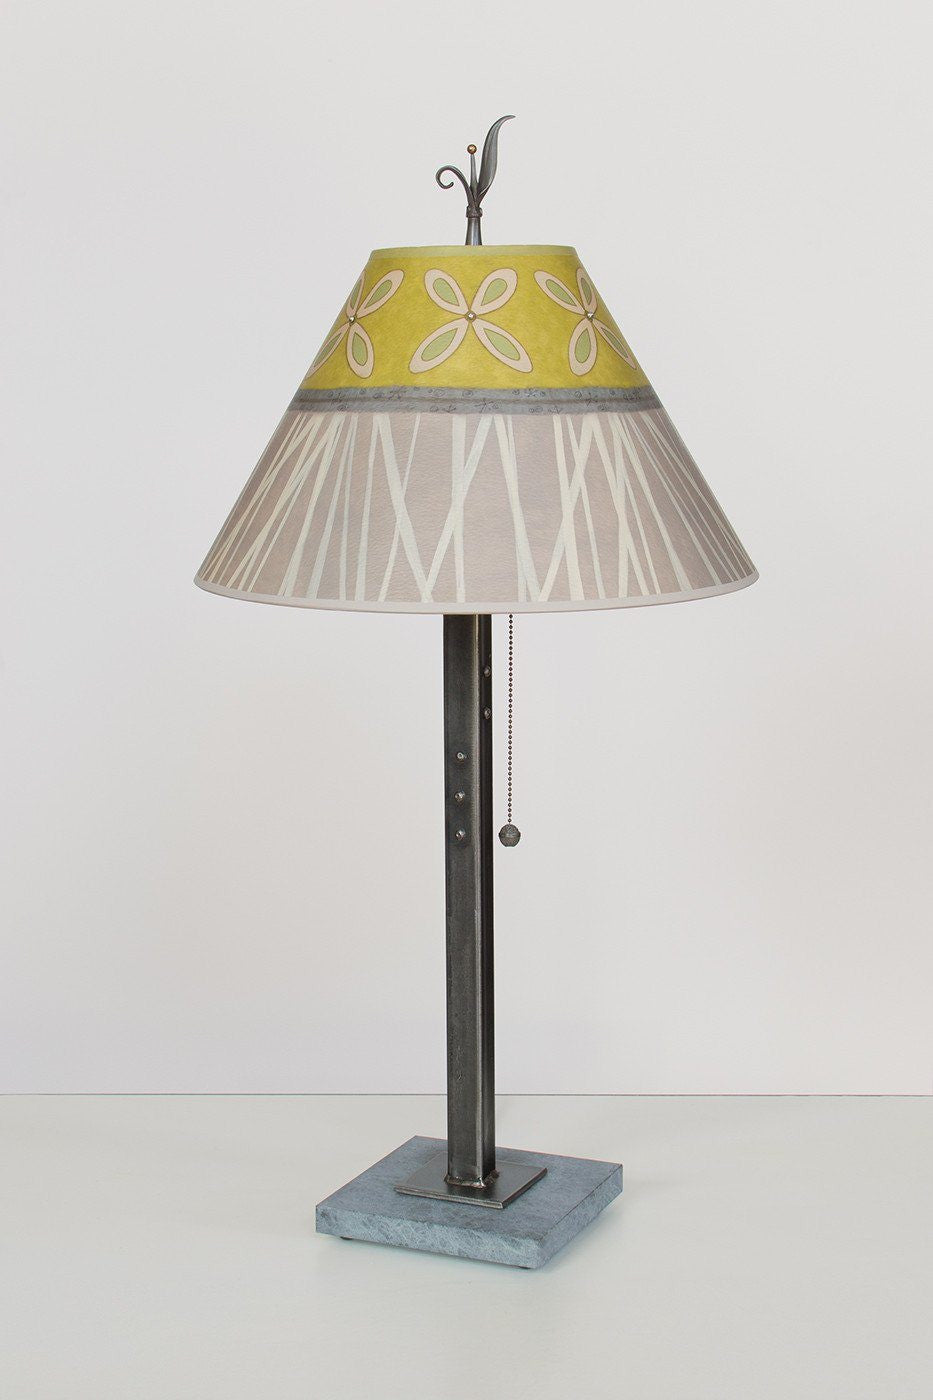 Steel Table Lamp on Marble with Medium Conical Shade in Kiwi